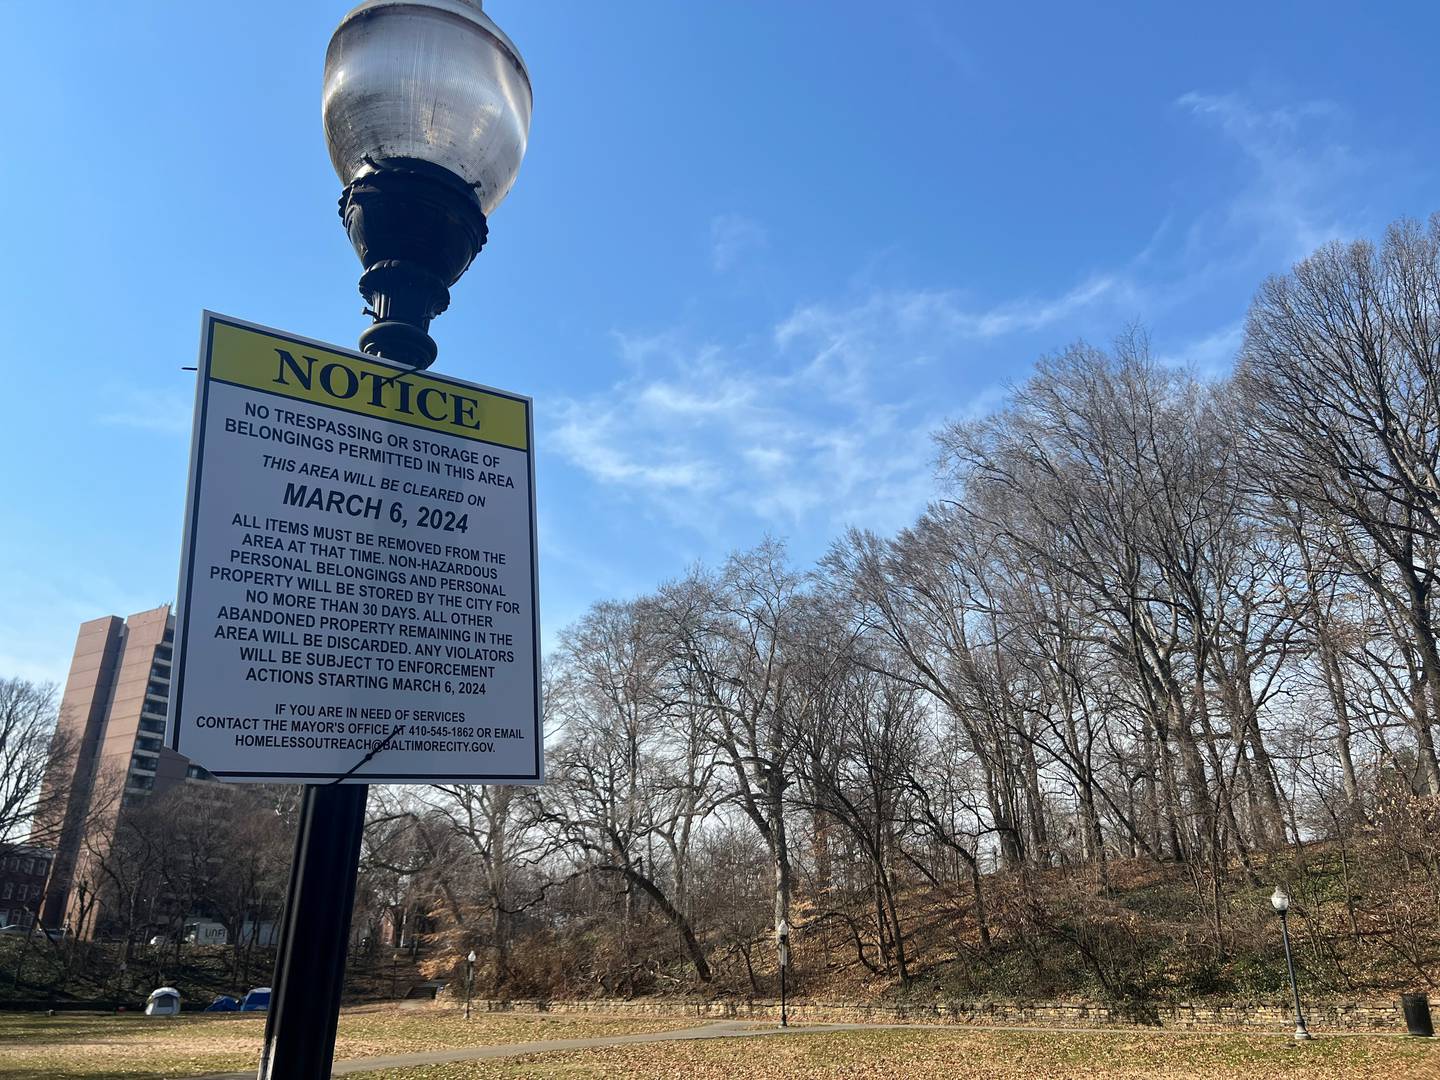 Several unhoused people previously staying in Wyman Park Dell have opted in for services and been placed in hotels ahead of the March 6 clearing of the site.